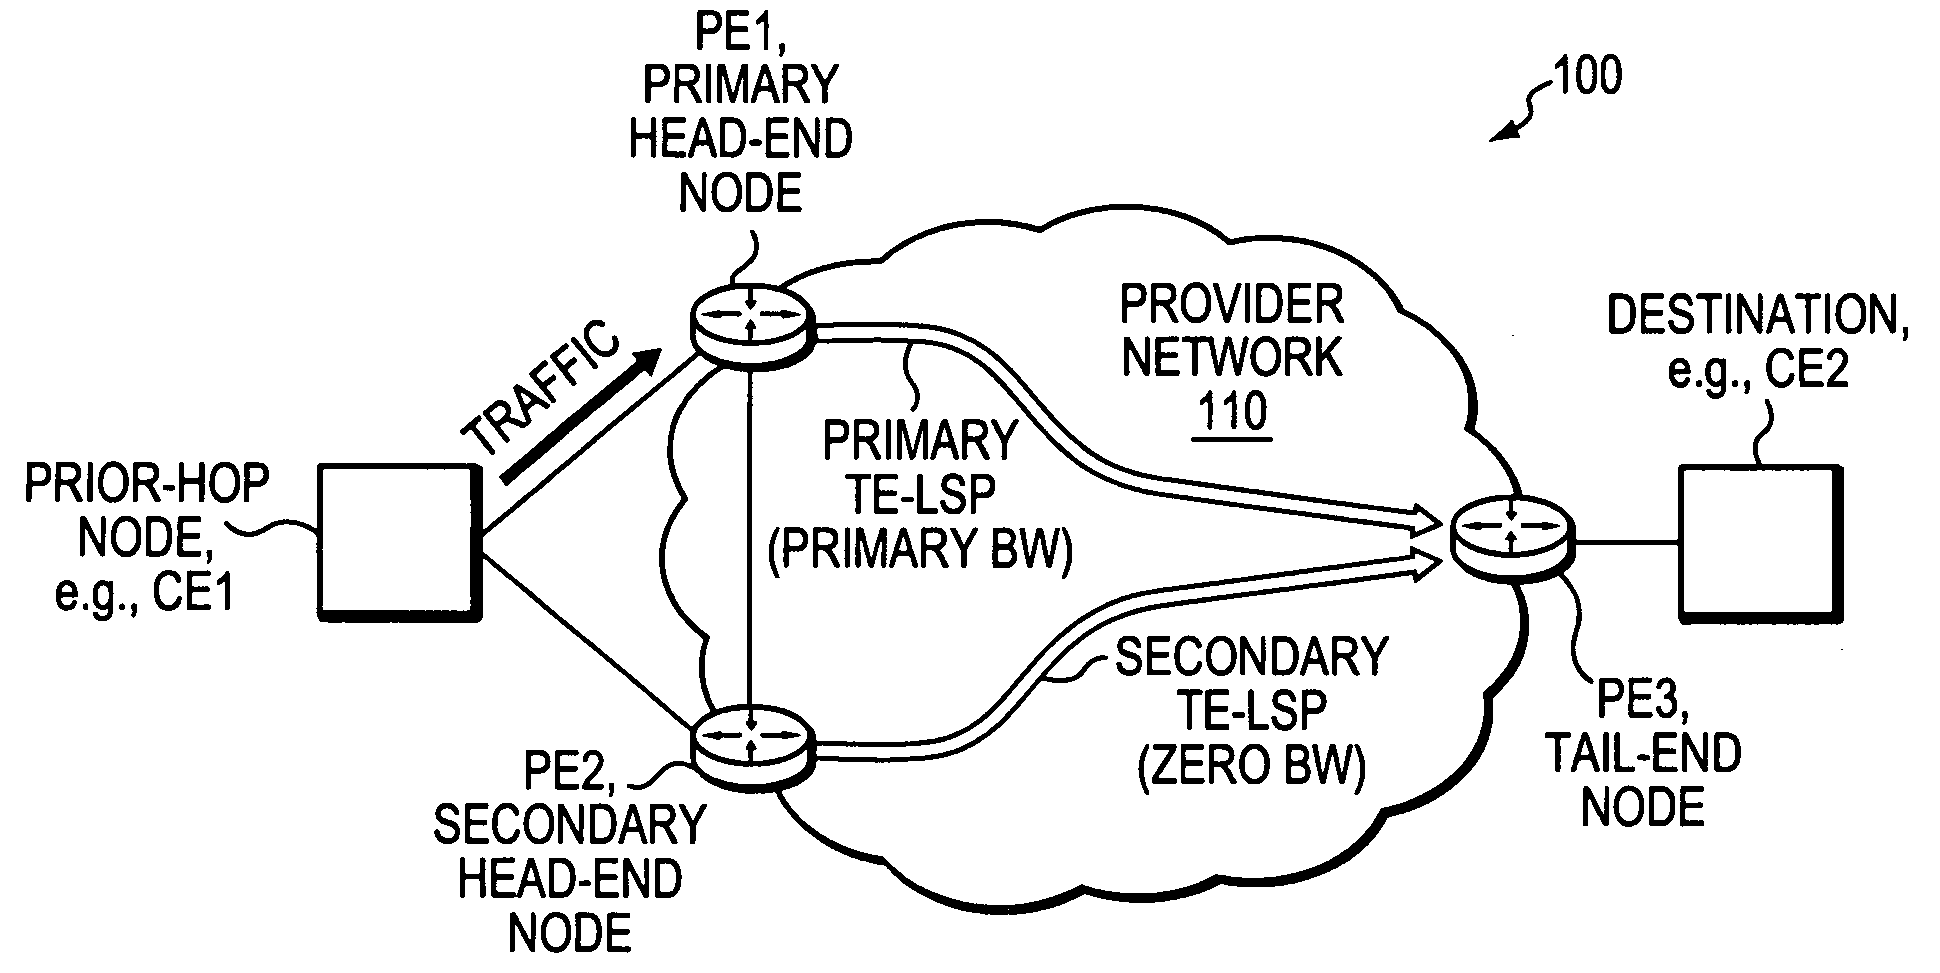 Technique for fast activation of a secondary head-end node TE-LSP upon failure of a primary head-end node TE-LSP